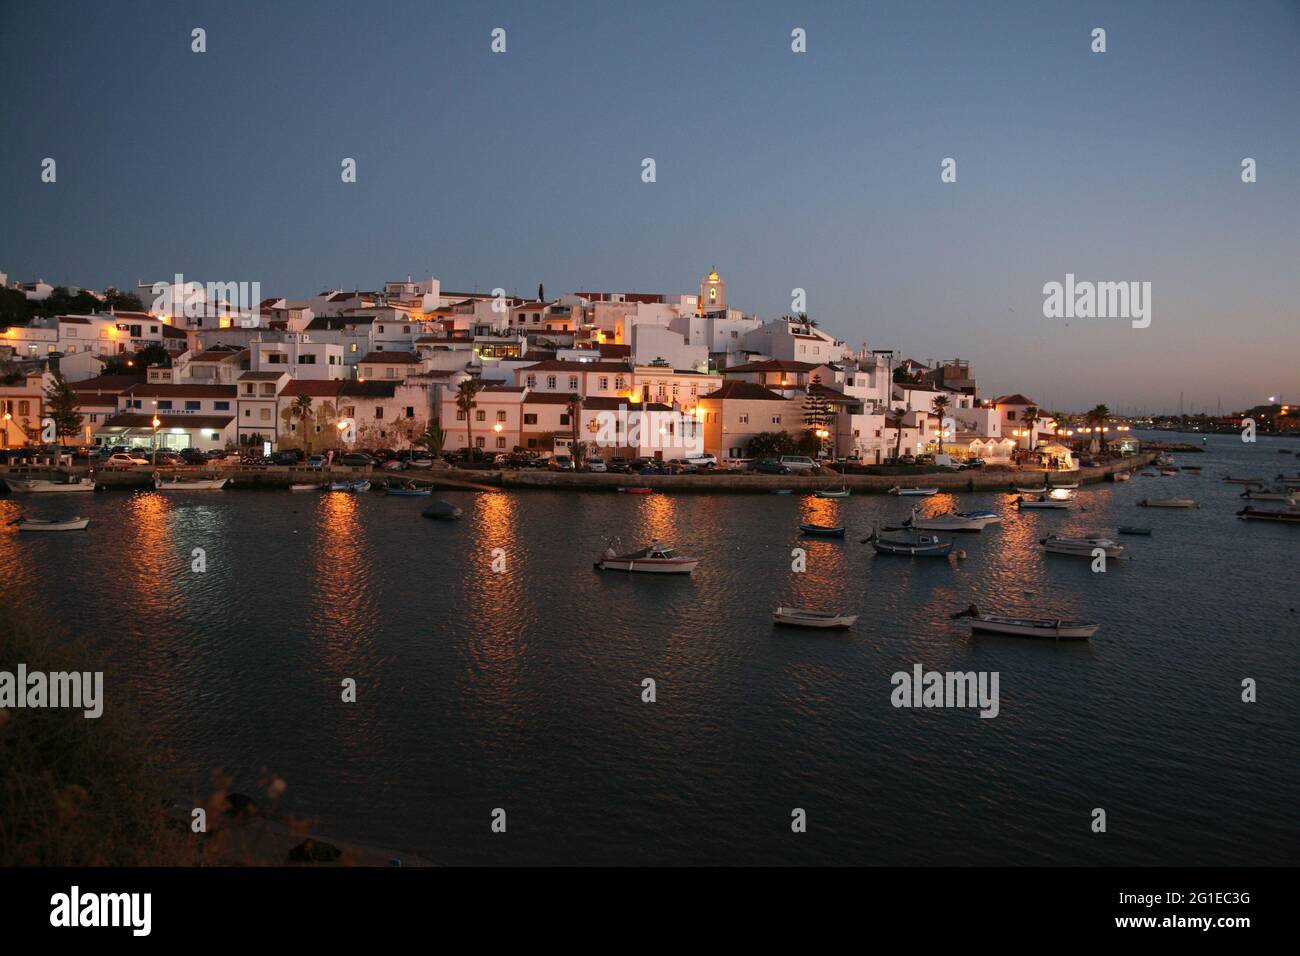 A general view of Ferragudo, a charming fishing town situated on the eastern side of the Arada River on the western border of the municipality of Lagoa, in Portugal and which is often claimed to be the prettiest village in the Algarve. Picture date: Thursday August 7, 2008. Stock Photo